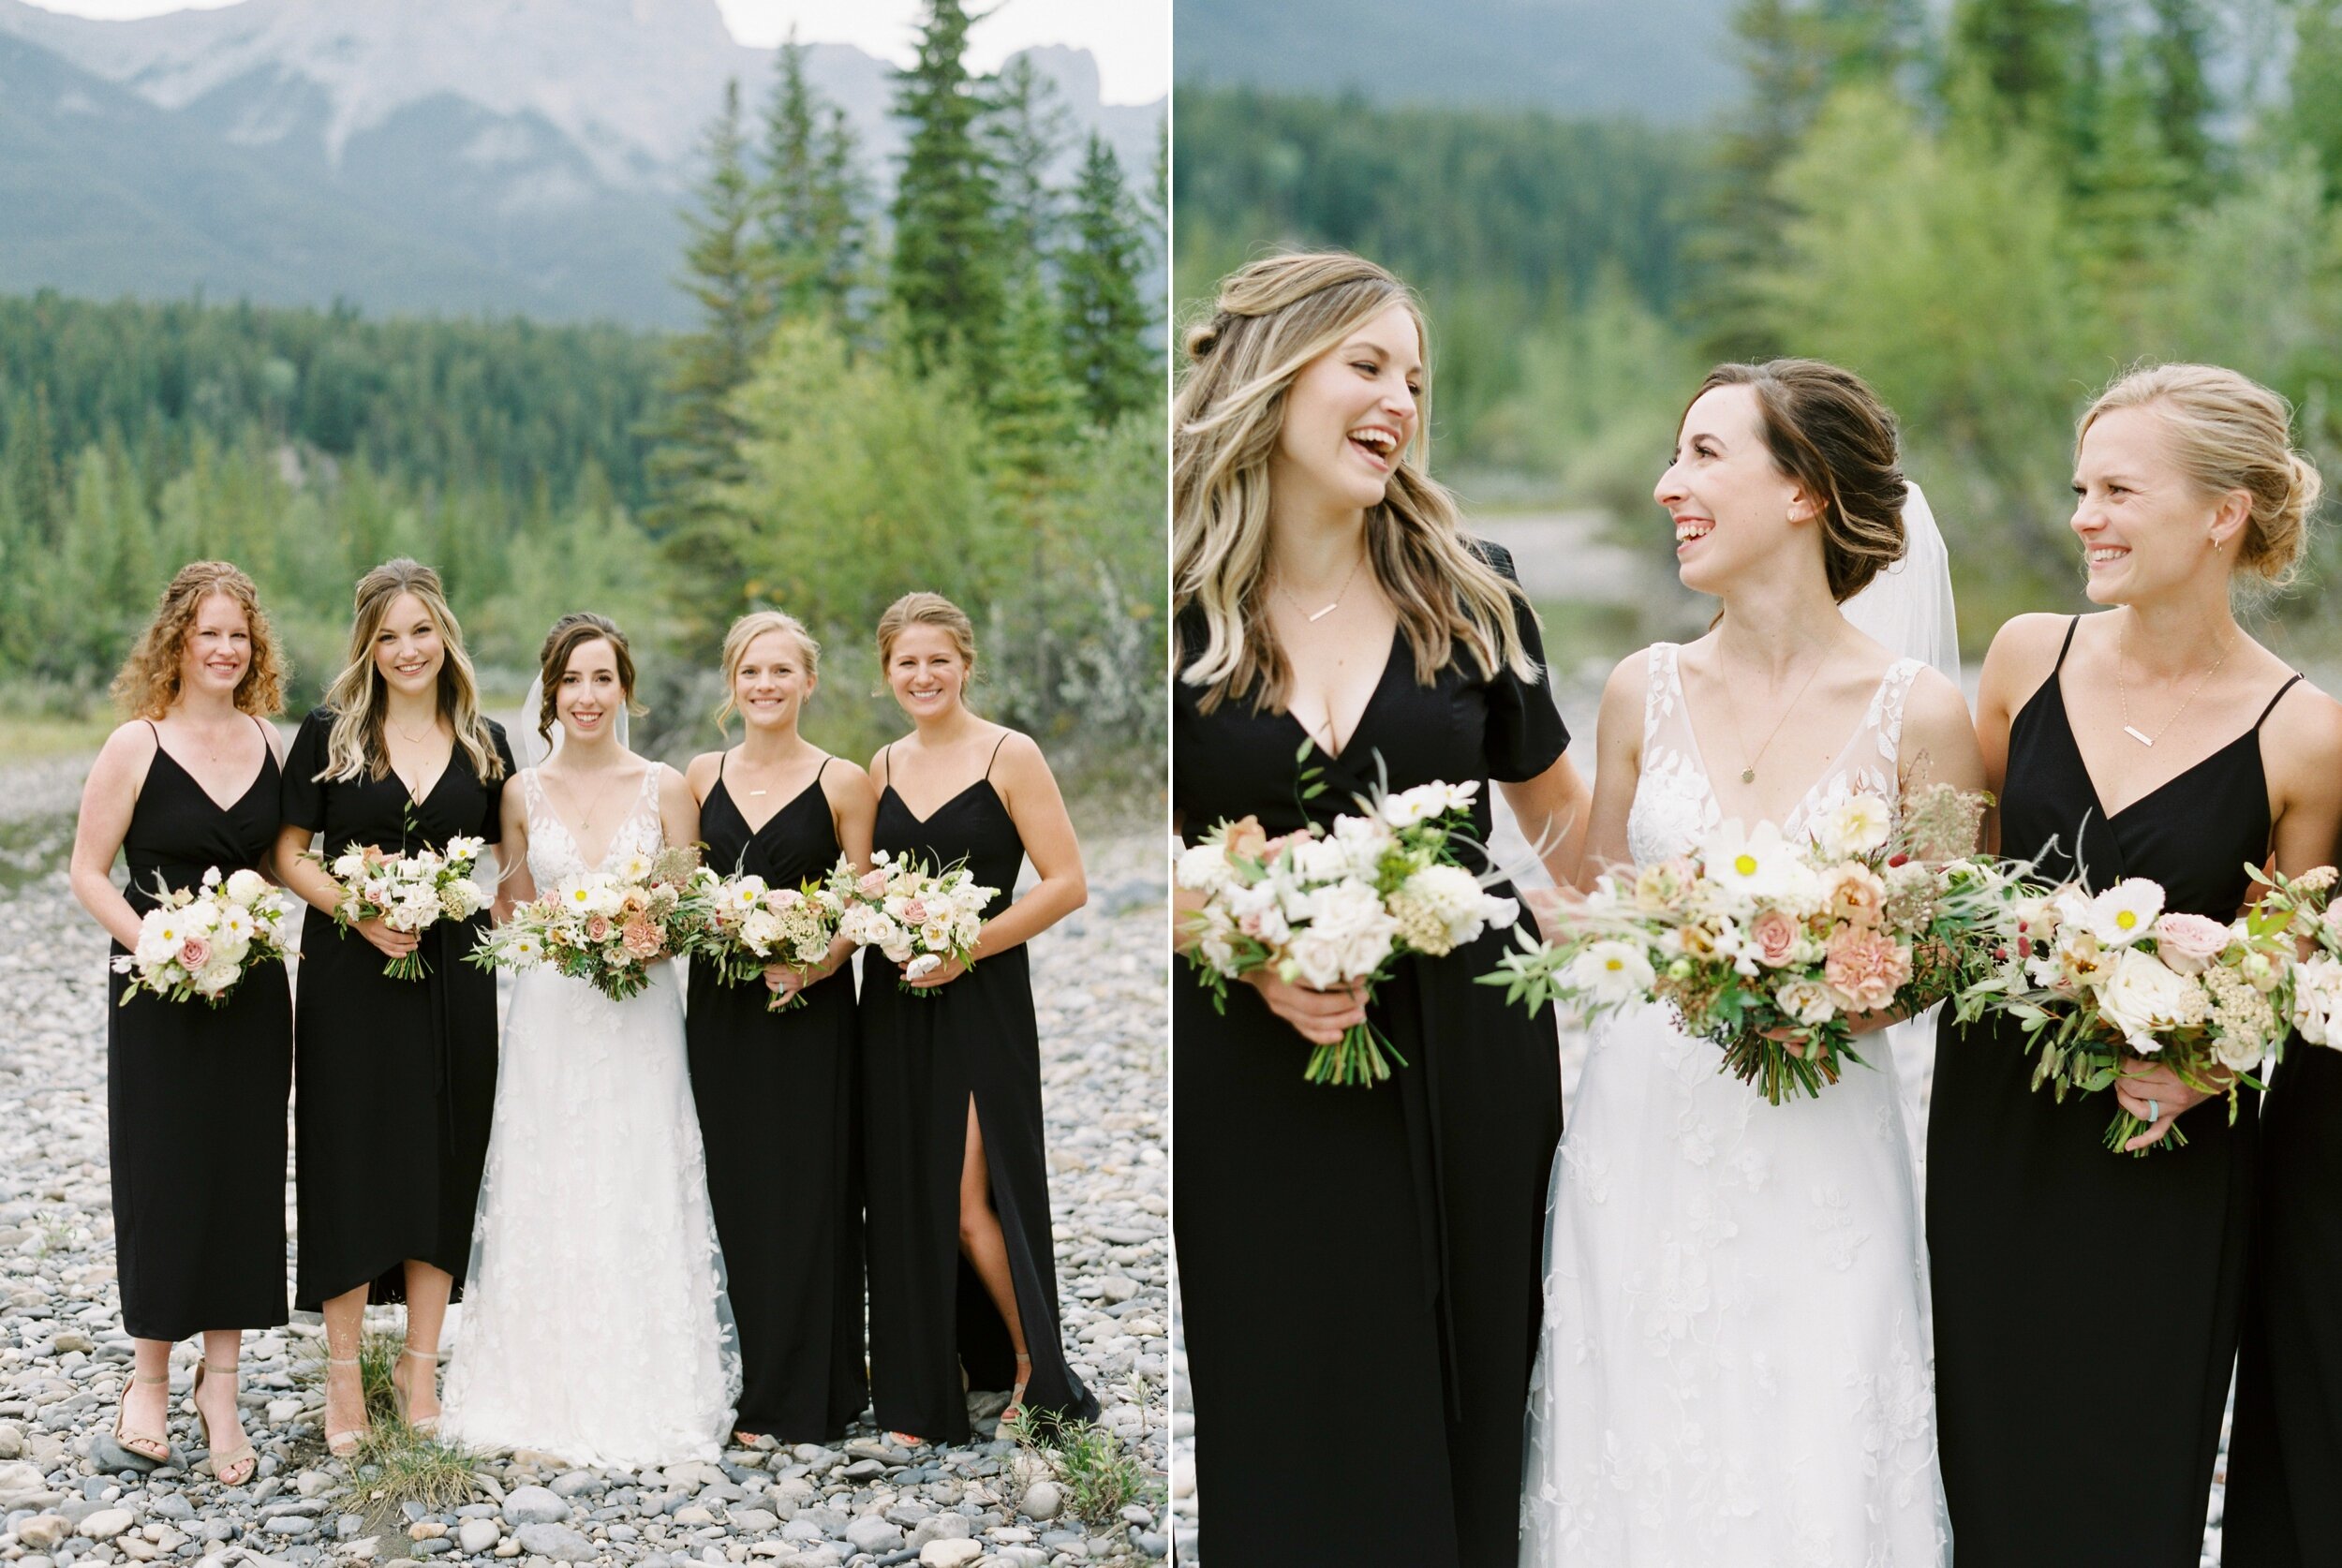  bridesmaids and groomsmen in matching black dresses and suits | all black wedding party | The Malcom Canmore Wedding Photographer | Fine Art film wedding photoraphy | portra 400 